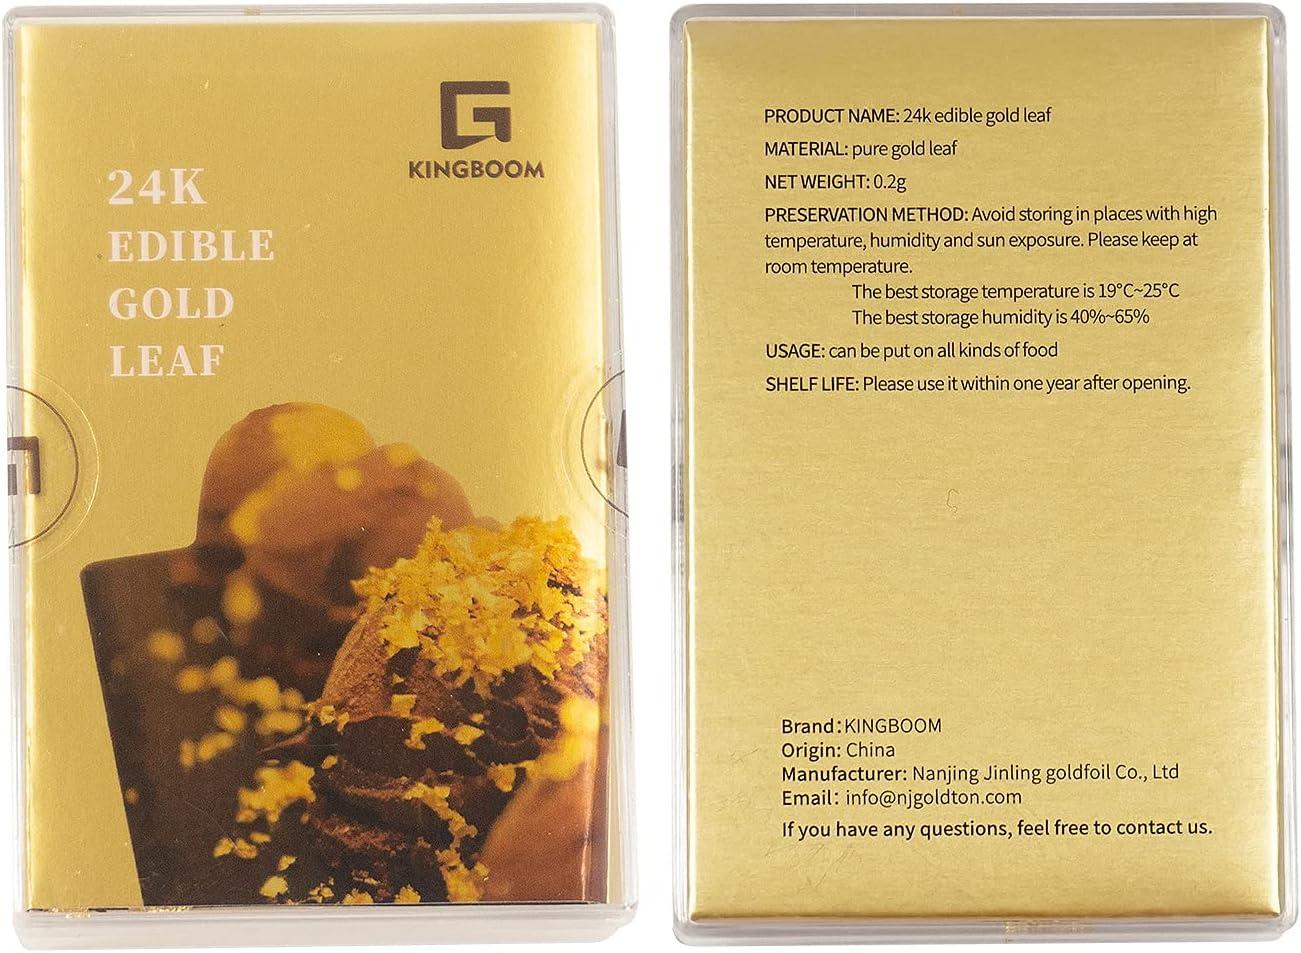 KINGBOOM 24K Edible Gold Leaf Sheets - 10 Sheets of 1.7 x 1.7 Inches  Genuine Gold Leaf for Cupcakes,…See more KINGBOOM 24K Edible Gold Leaf  Sheets 